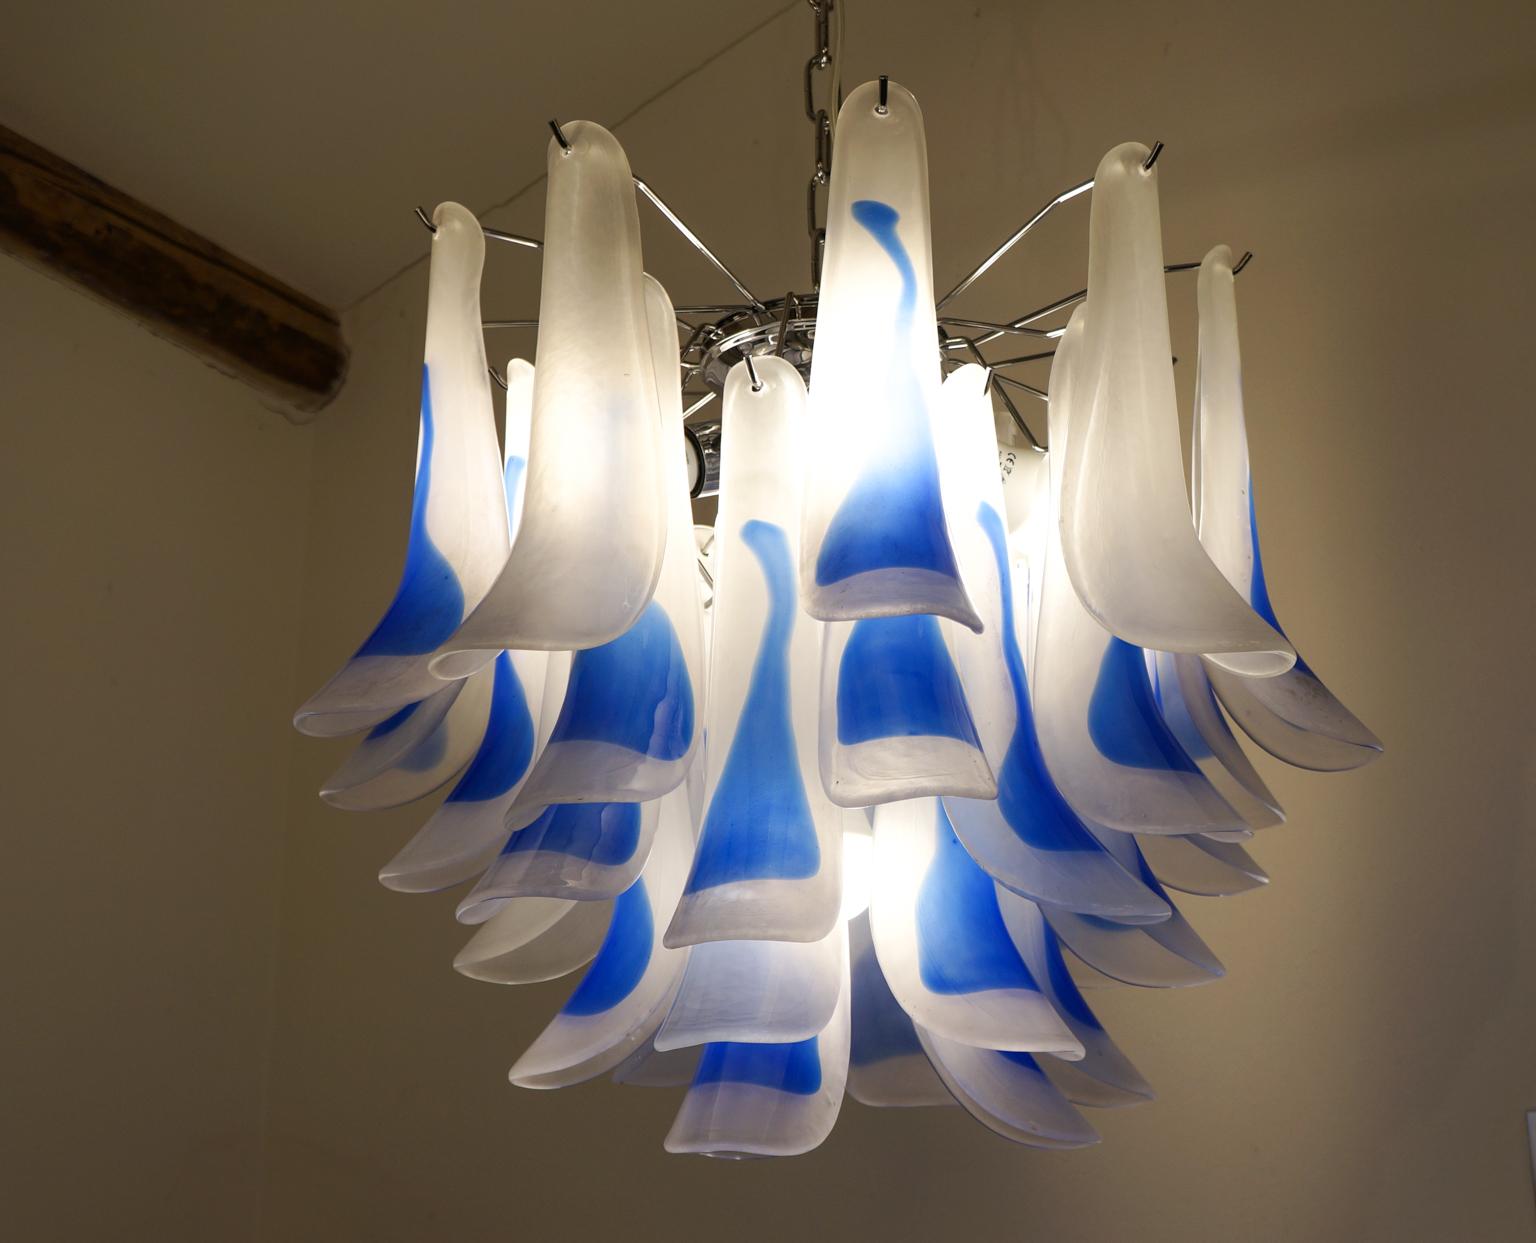 Alberto Donà Mid-Century Modern Crystal Blue Murano Glass Selle Chandelier, 1992 For Sale 2